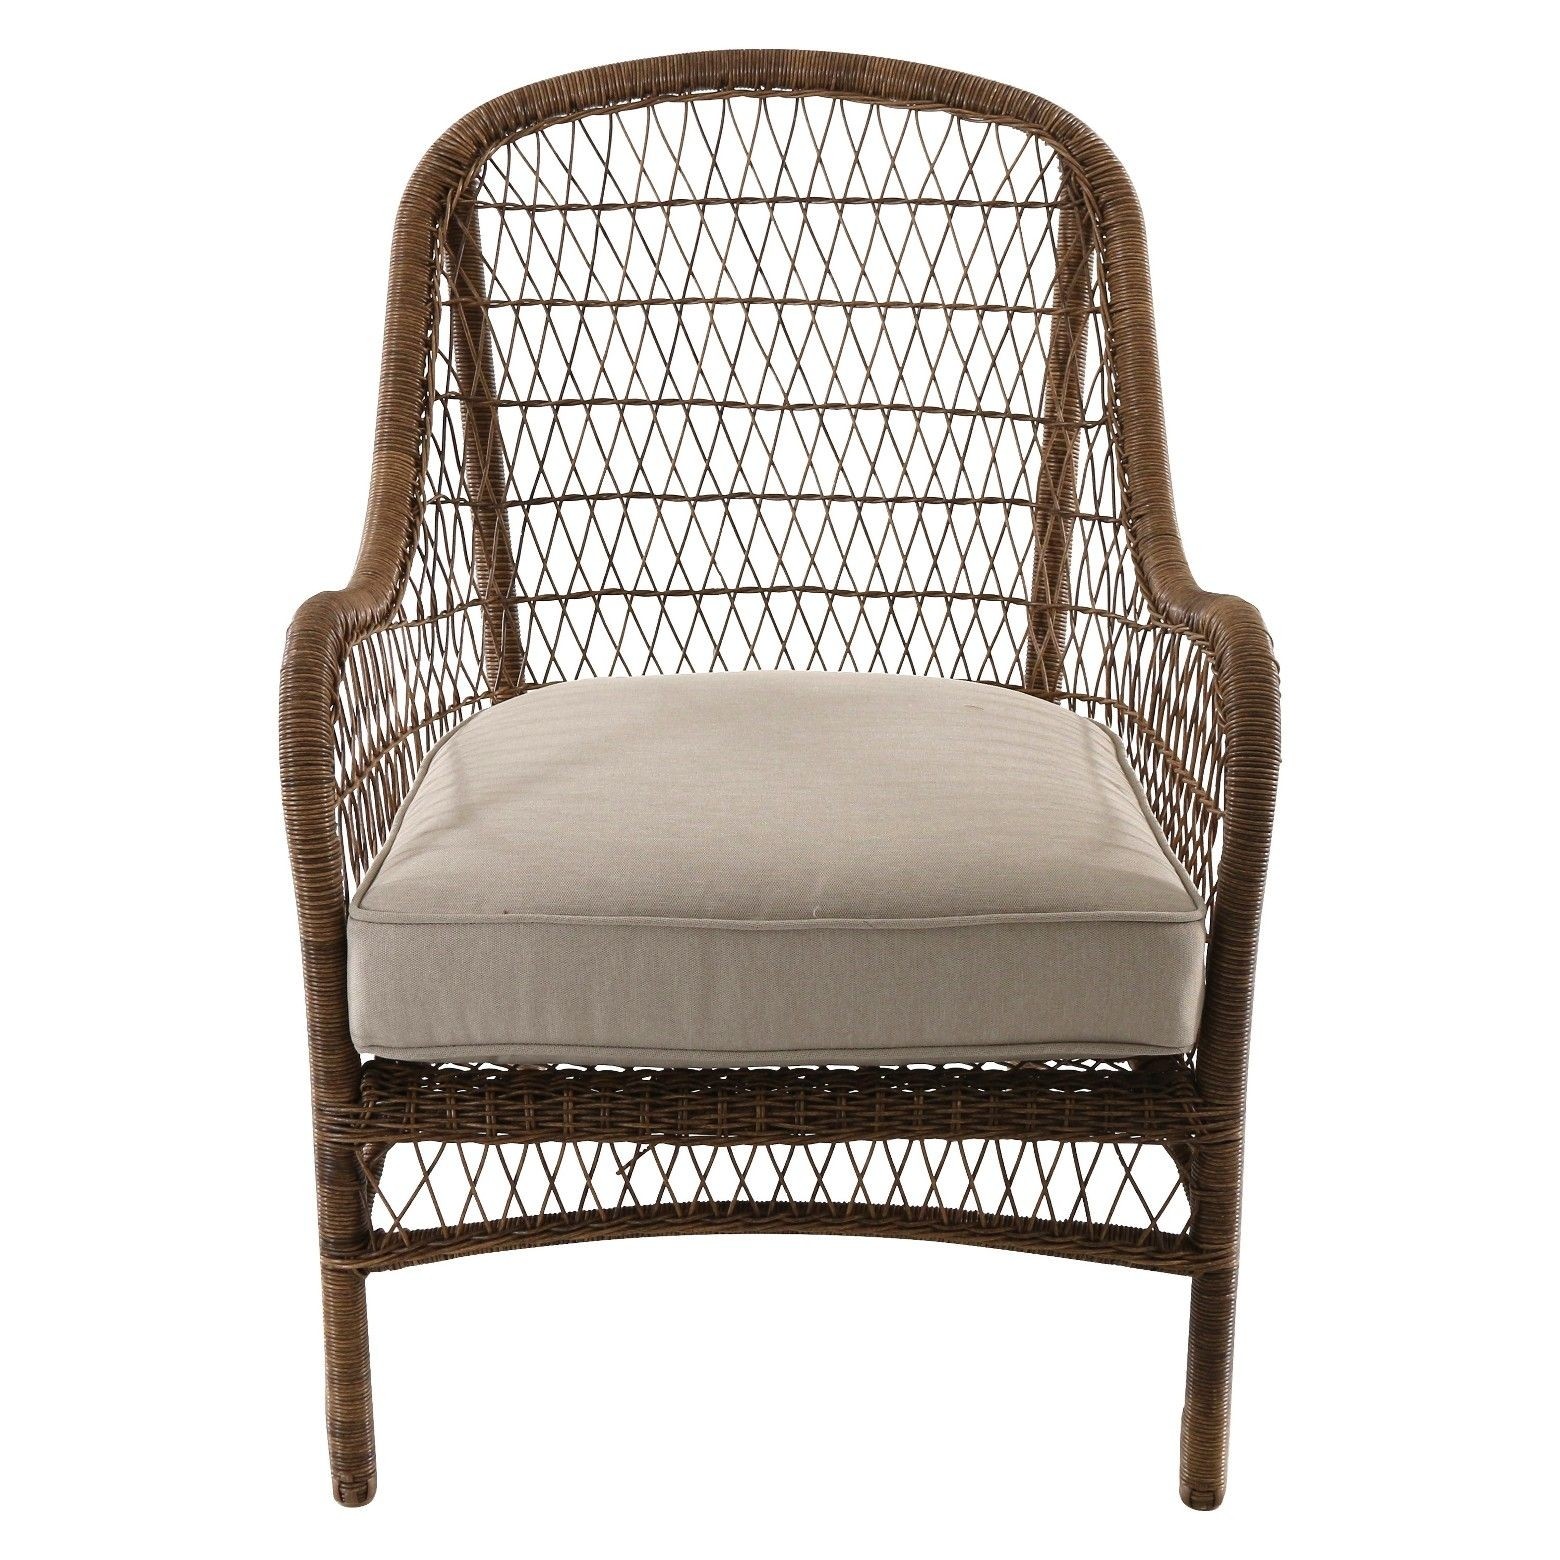 Open weave wicker patio accent chair tan threshold